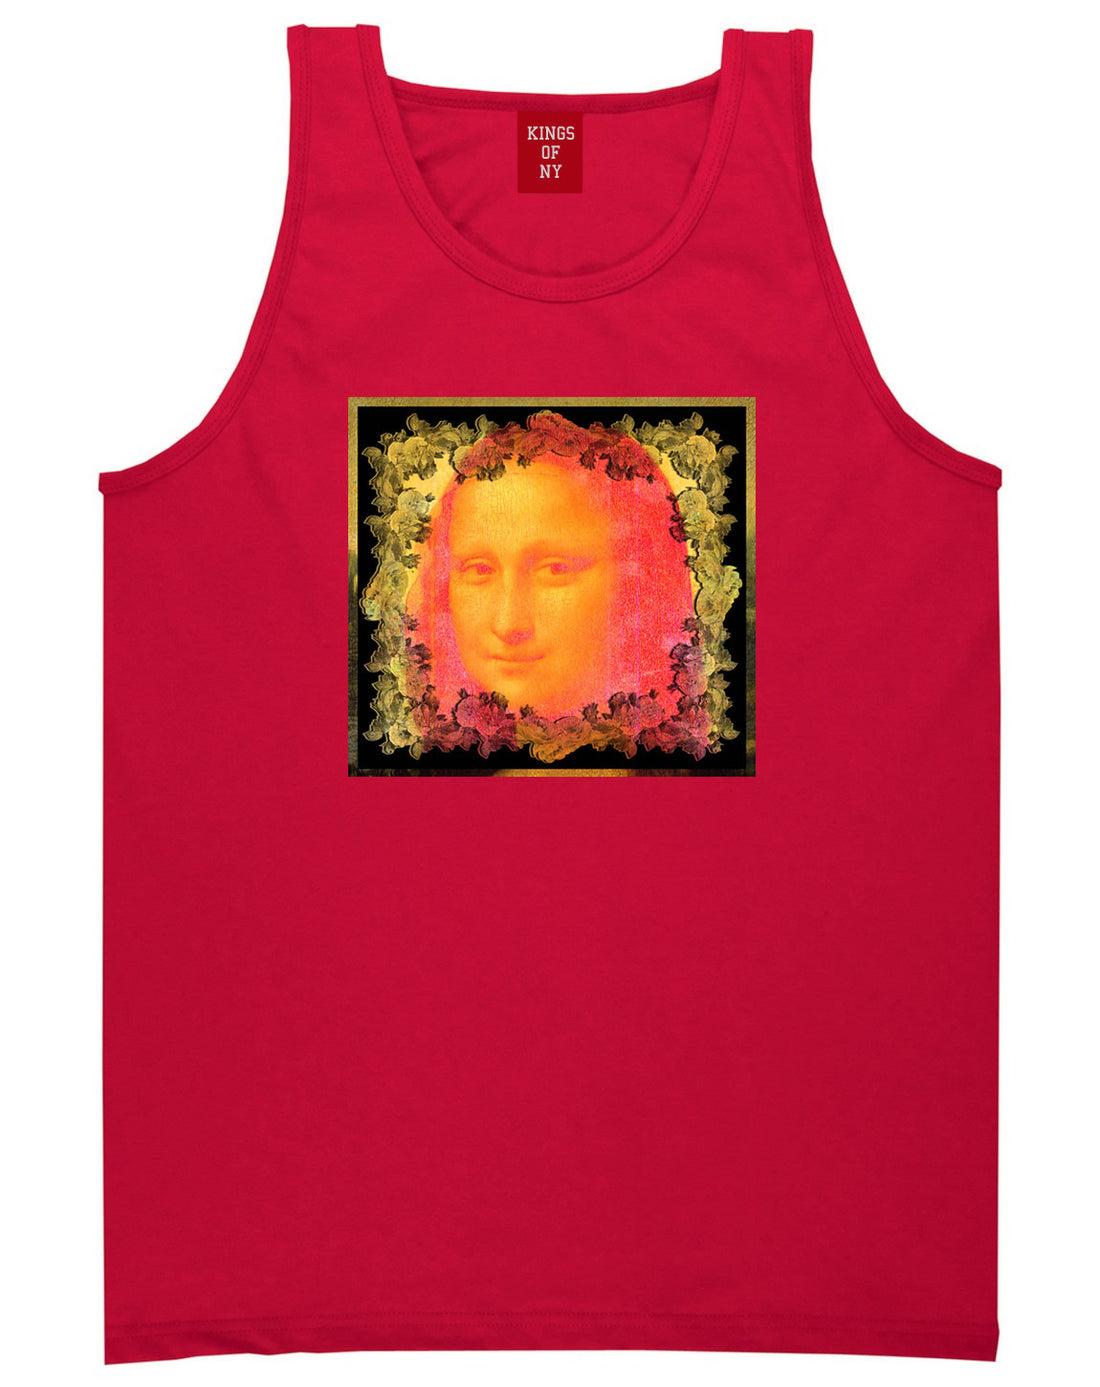 Mona Artwork Art Lisa Wall Painting Tank Top In Red by Kings Of NY